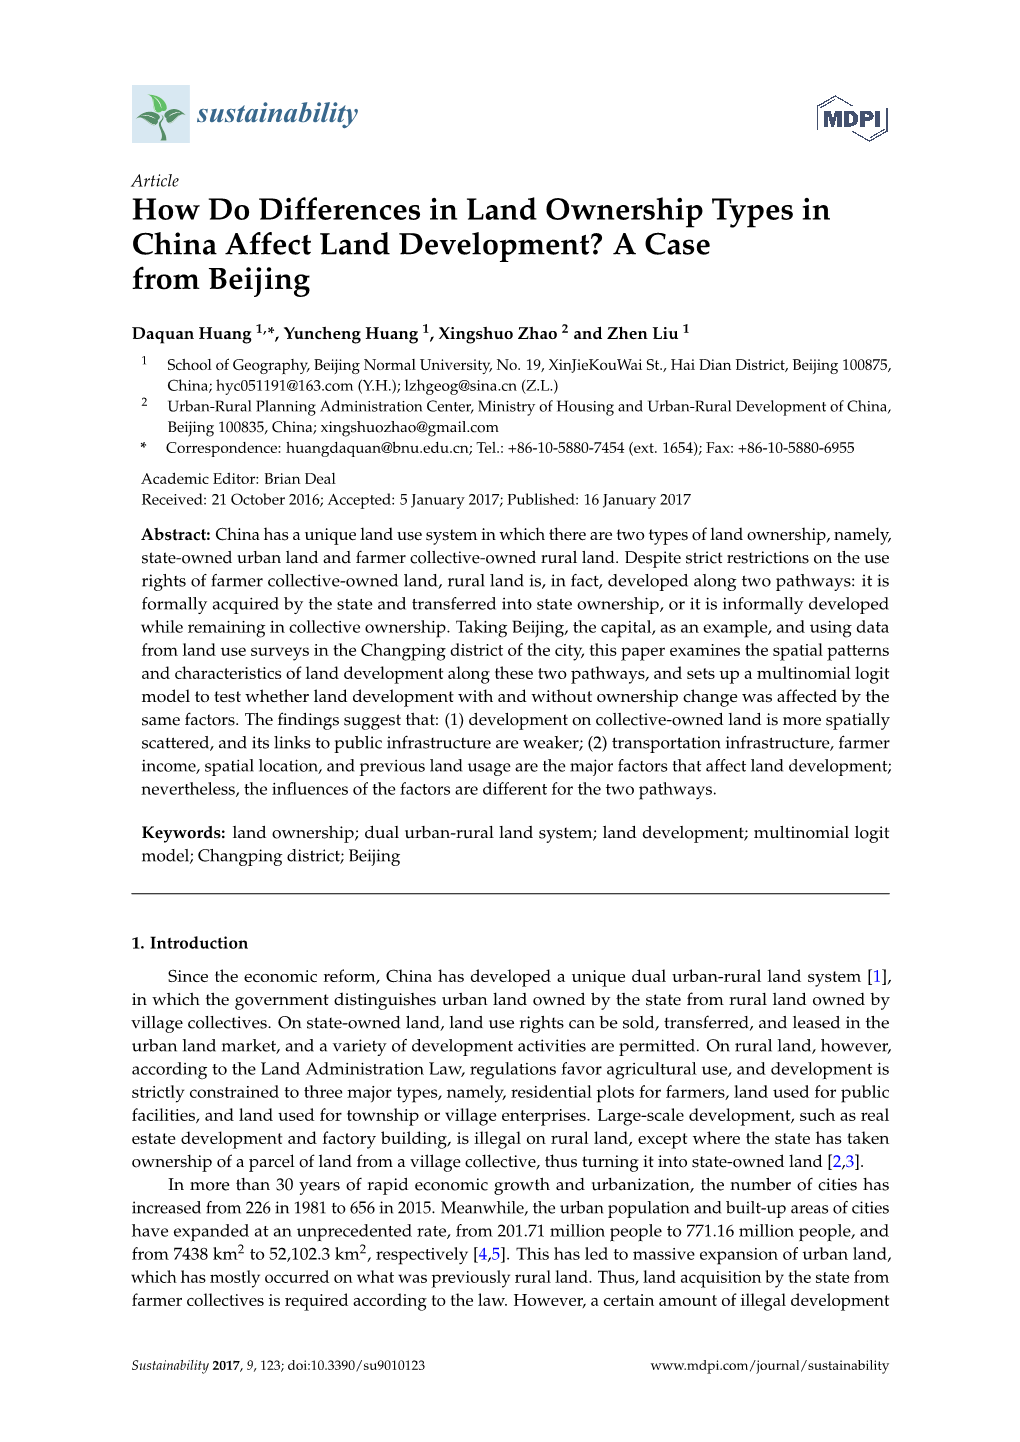 How Do Differences in Land Ownership Types in China Affect Land Development? a Case from Beijing